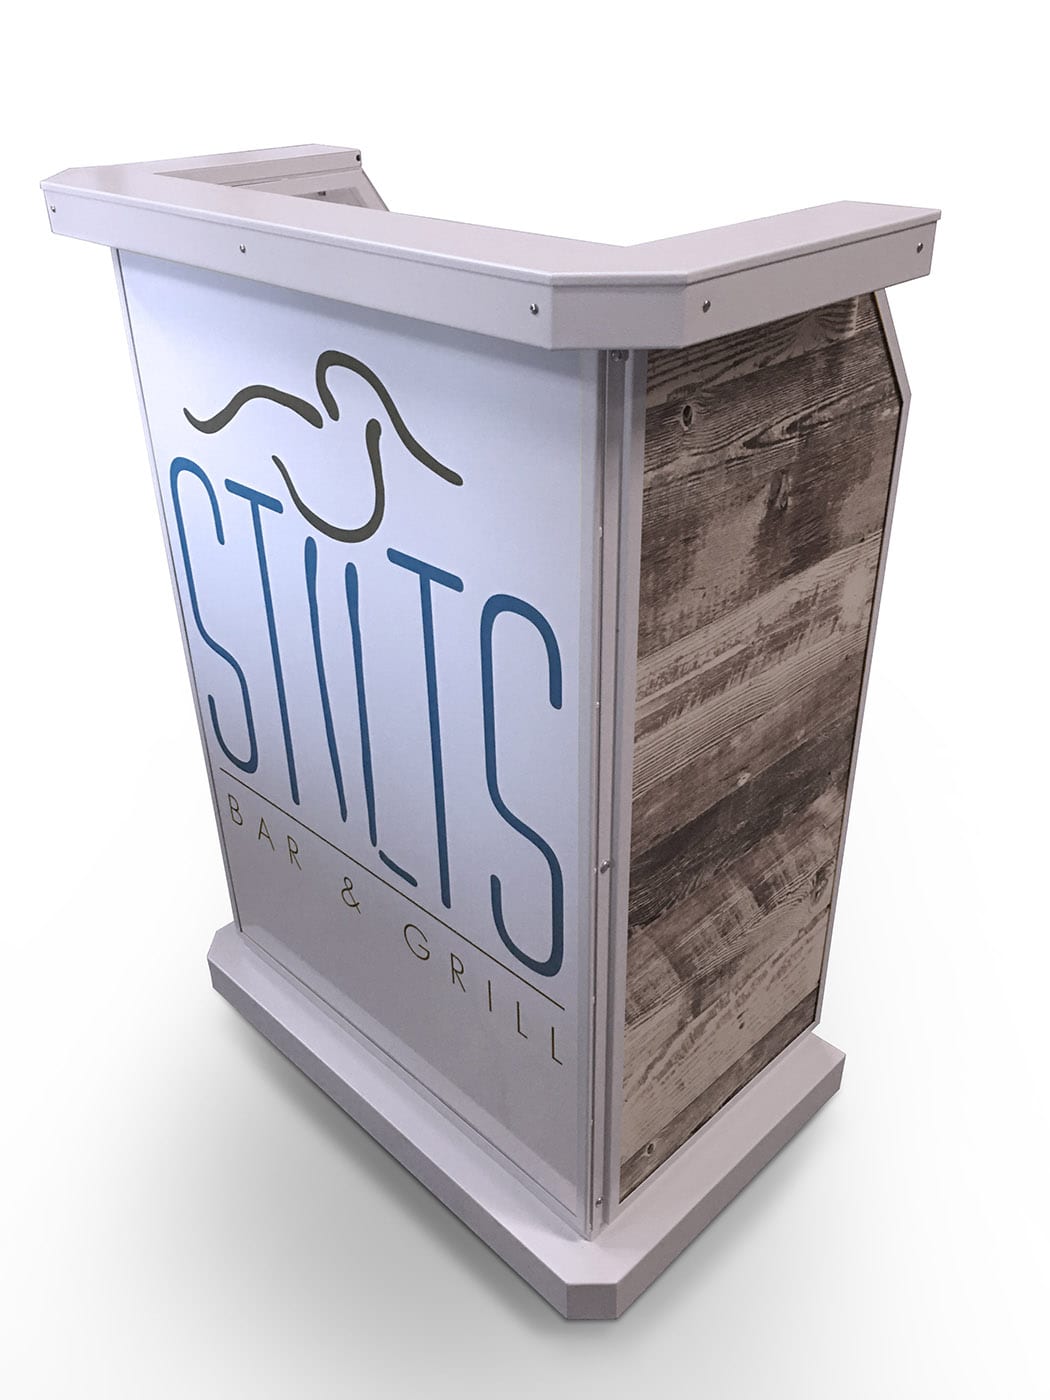 Stilts Bar and Grill Deluxe Hostess Stand